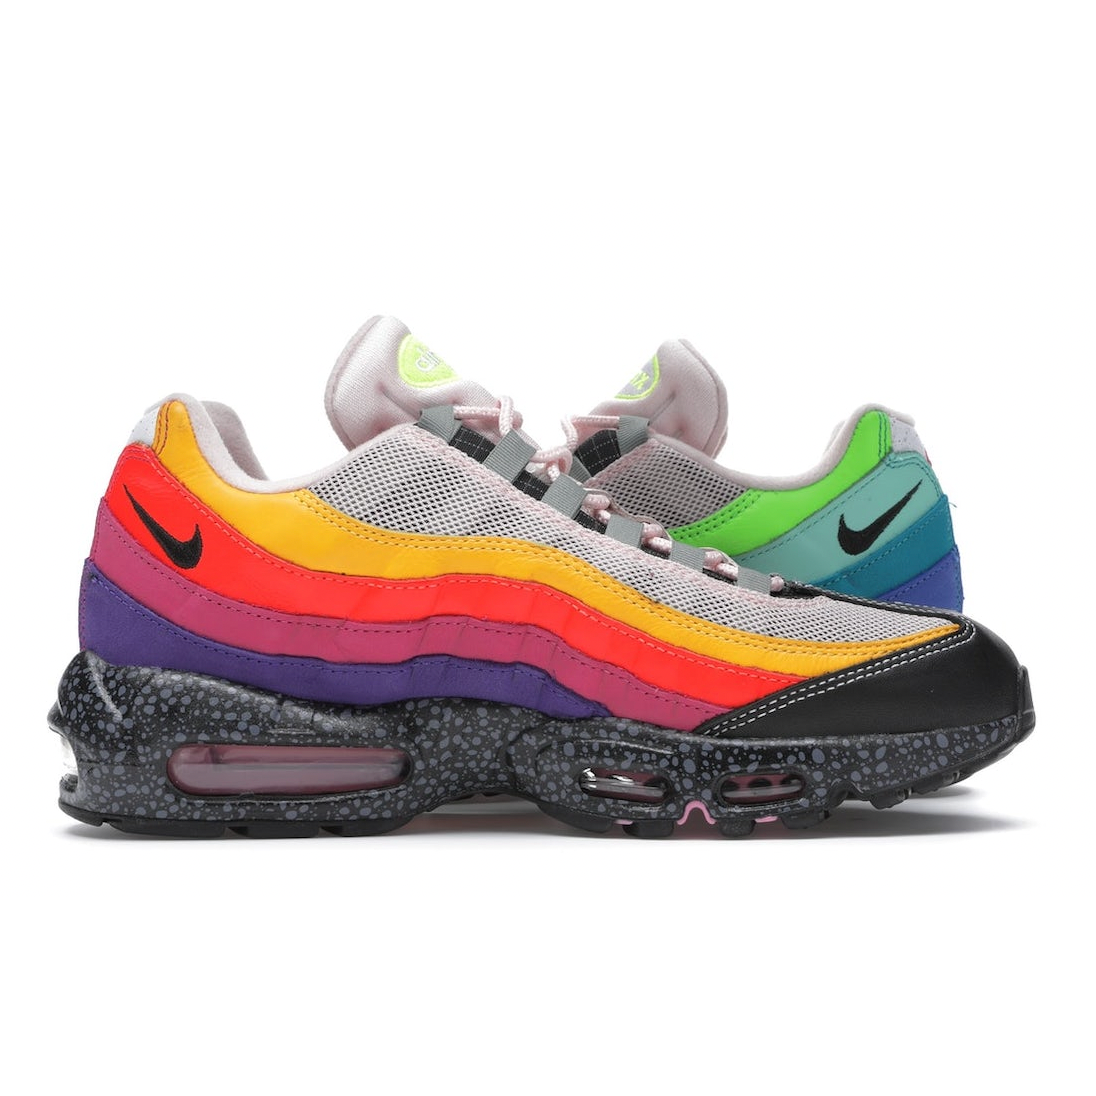 Nike Air Max 95 size? Air Max Day (2020) by Nike from £400.00